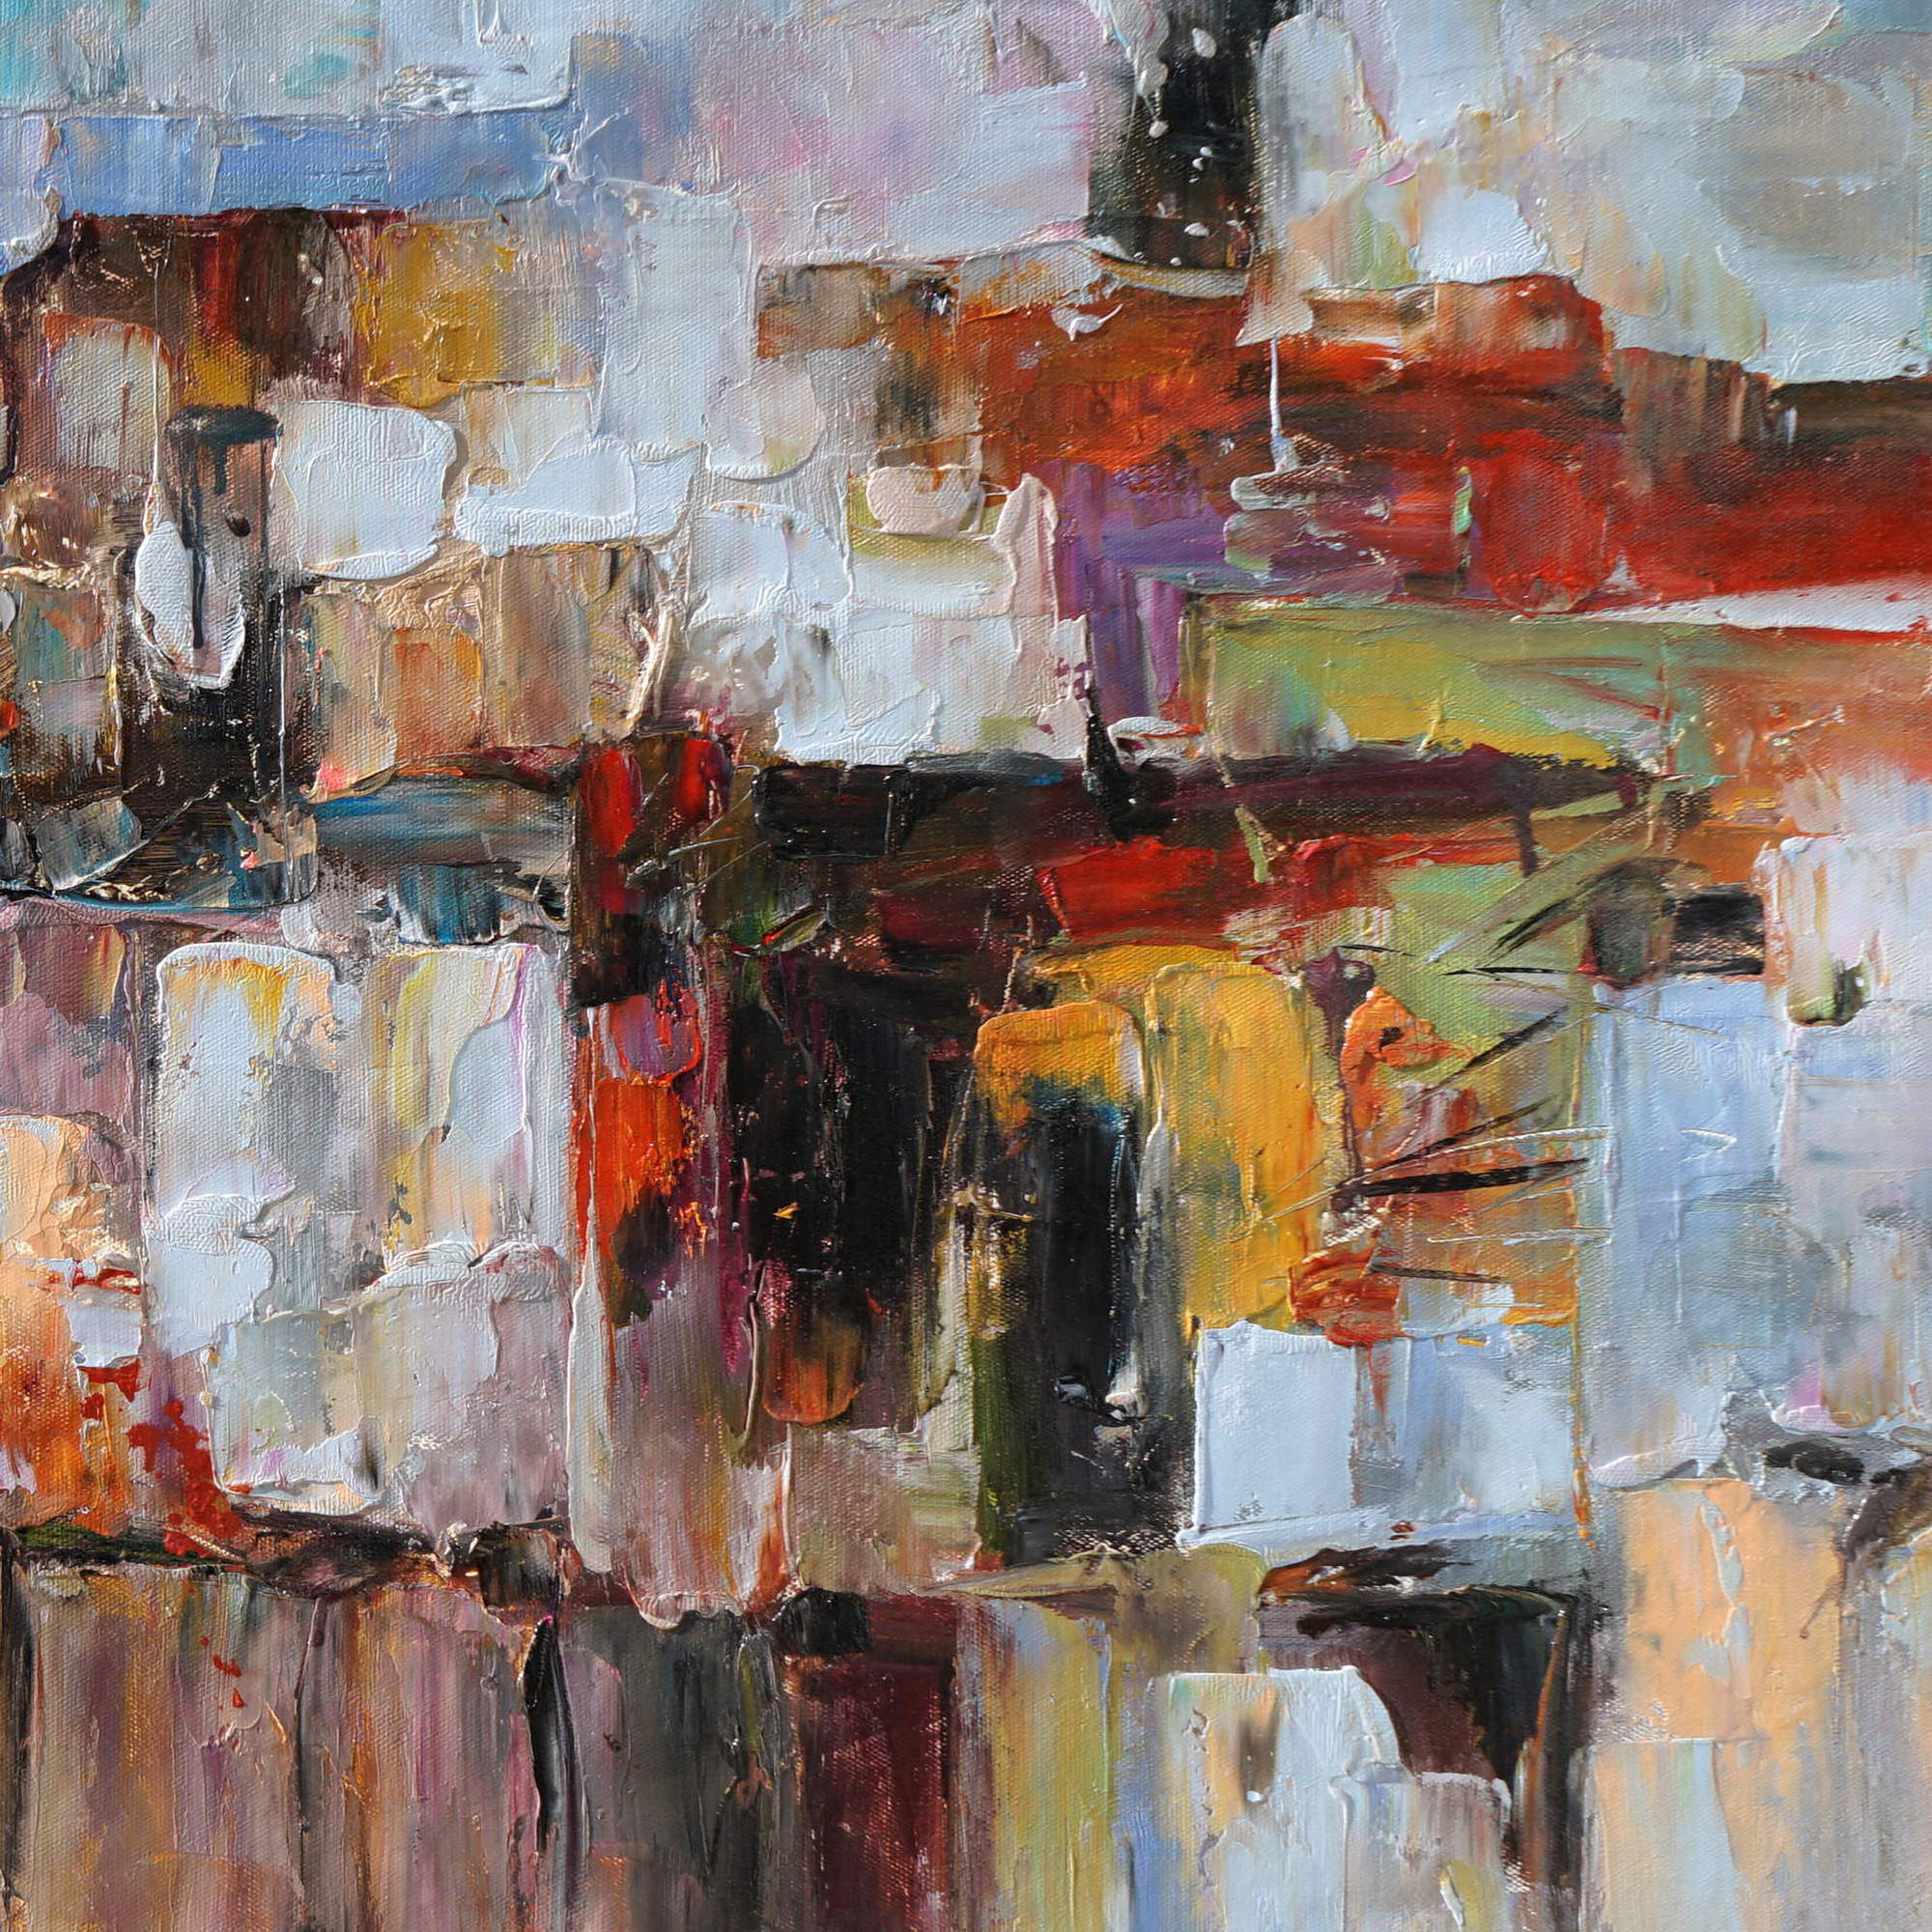 Hand painted Abstract Urban Modern 60x120cm